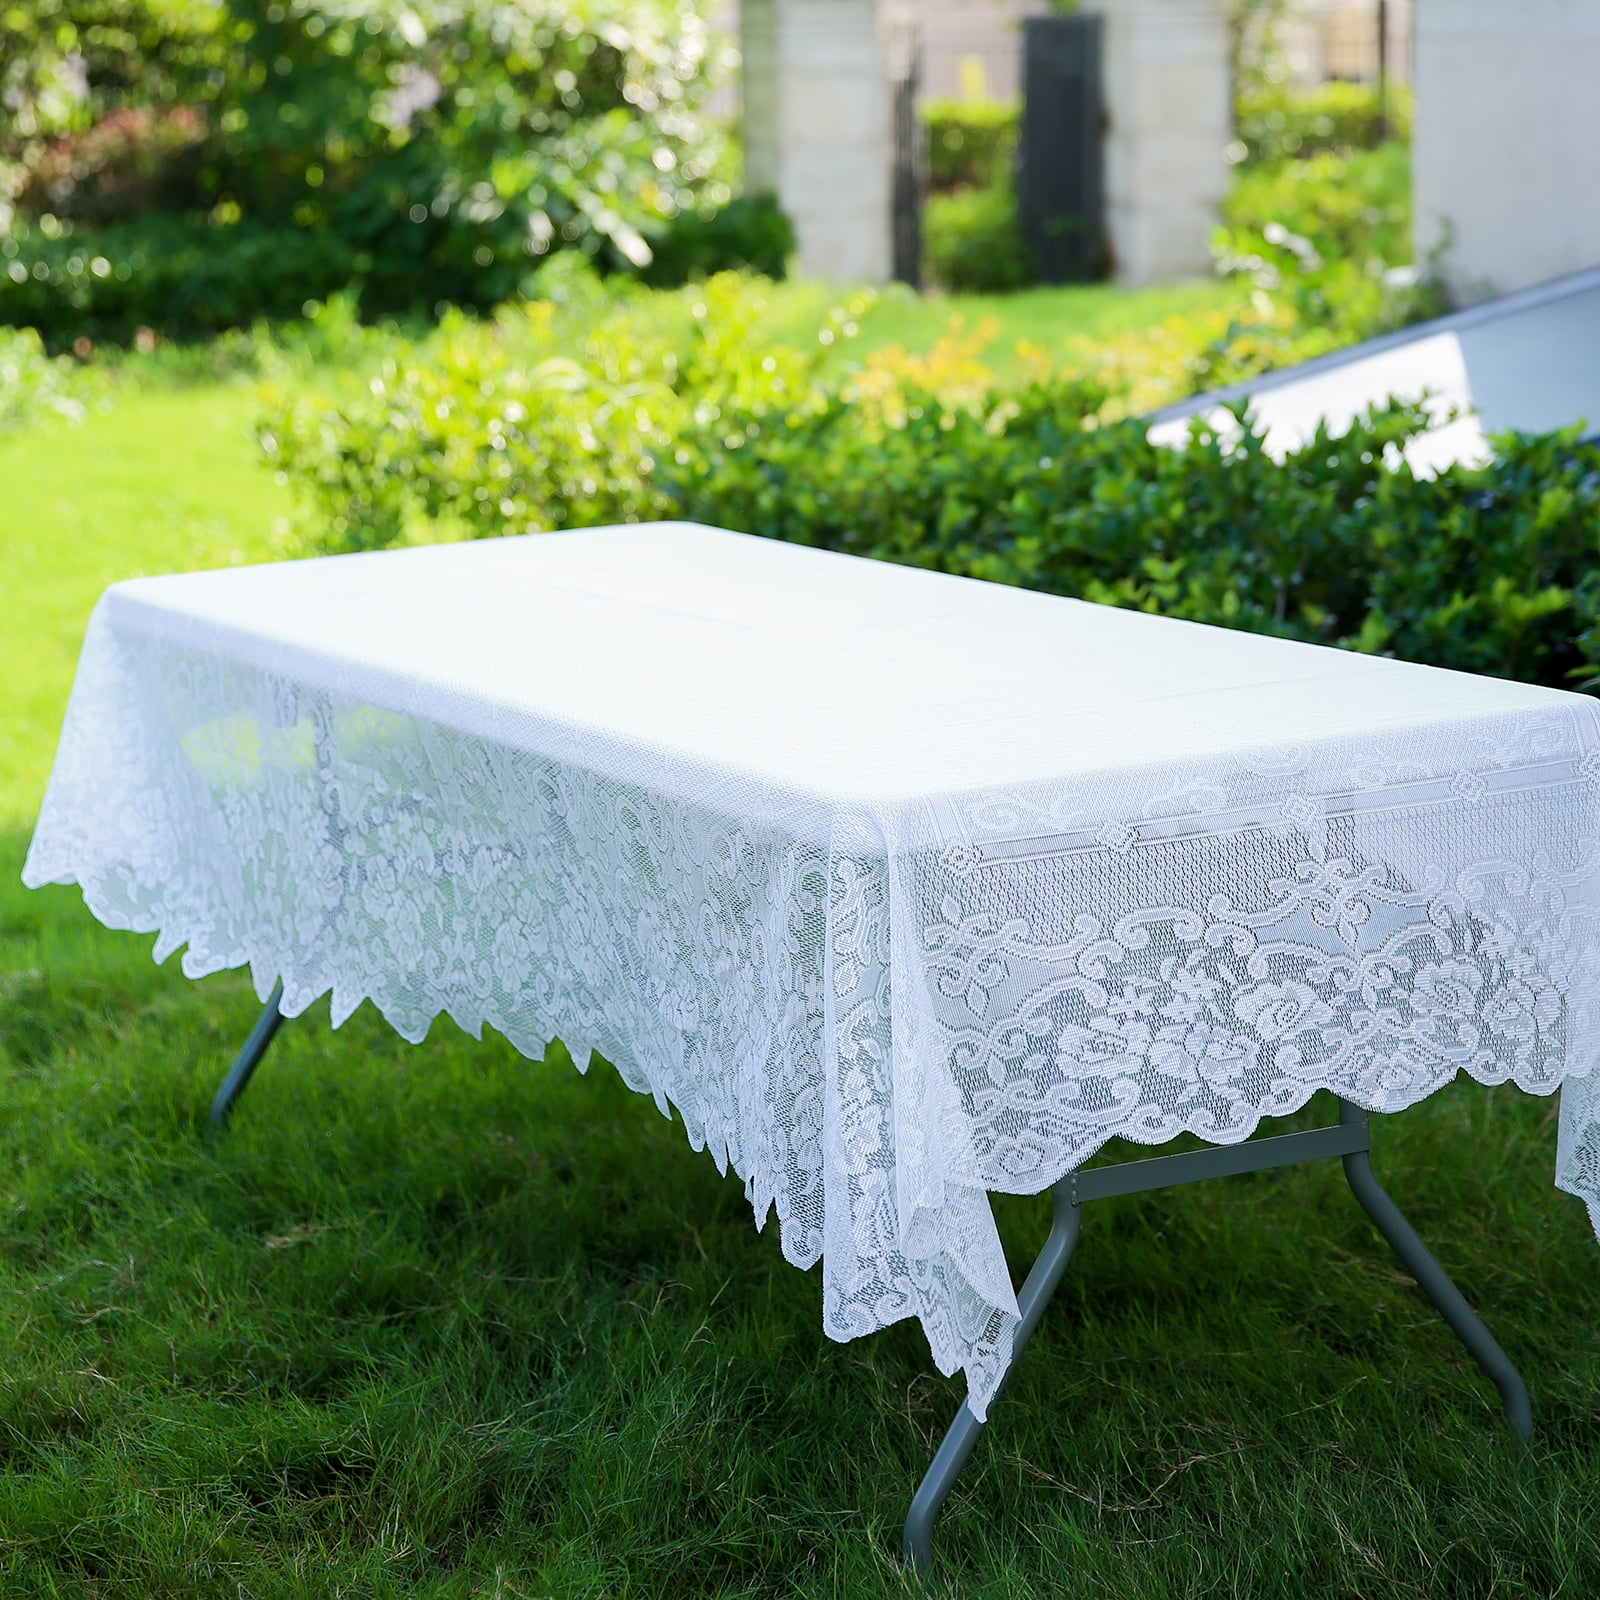 ALAZA Hummingbird Round Tablecloth Polyester Lace Table Covers Circle Table Cloth 60 Inch for Birthday Party Wedding Holiday Kitchen Dining Room Decoration 